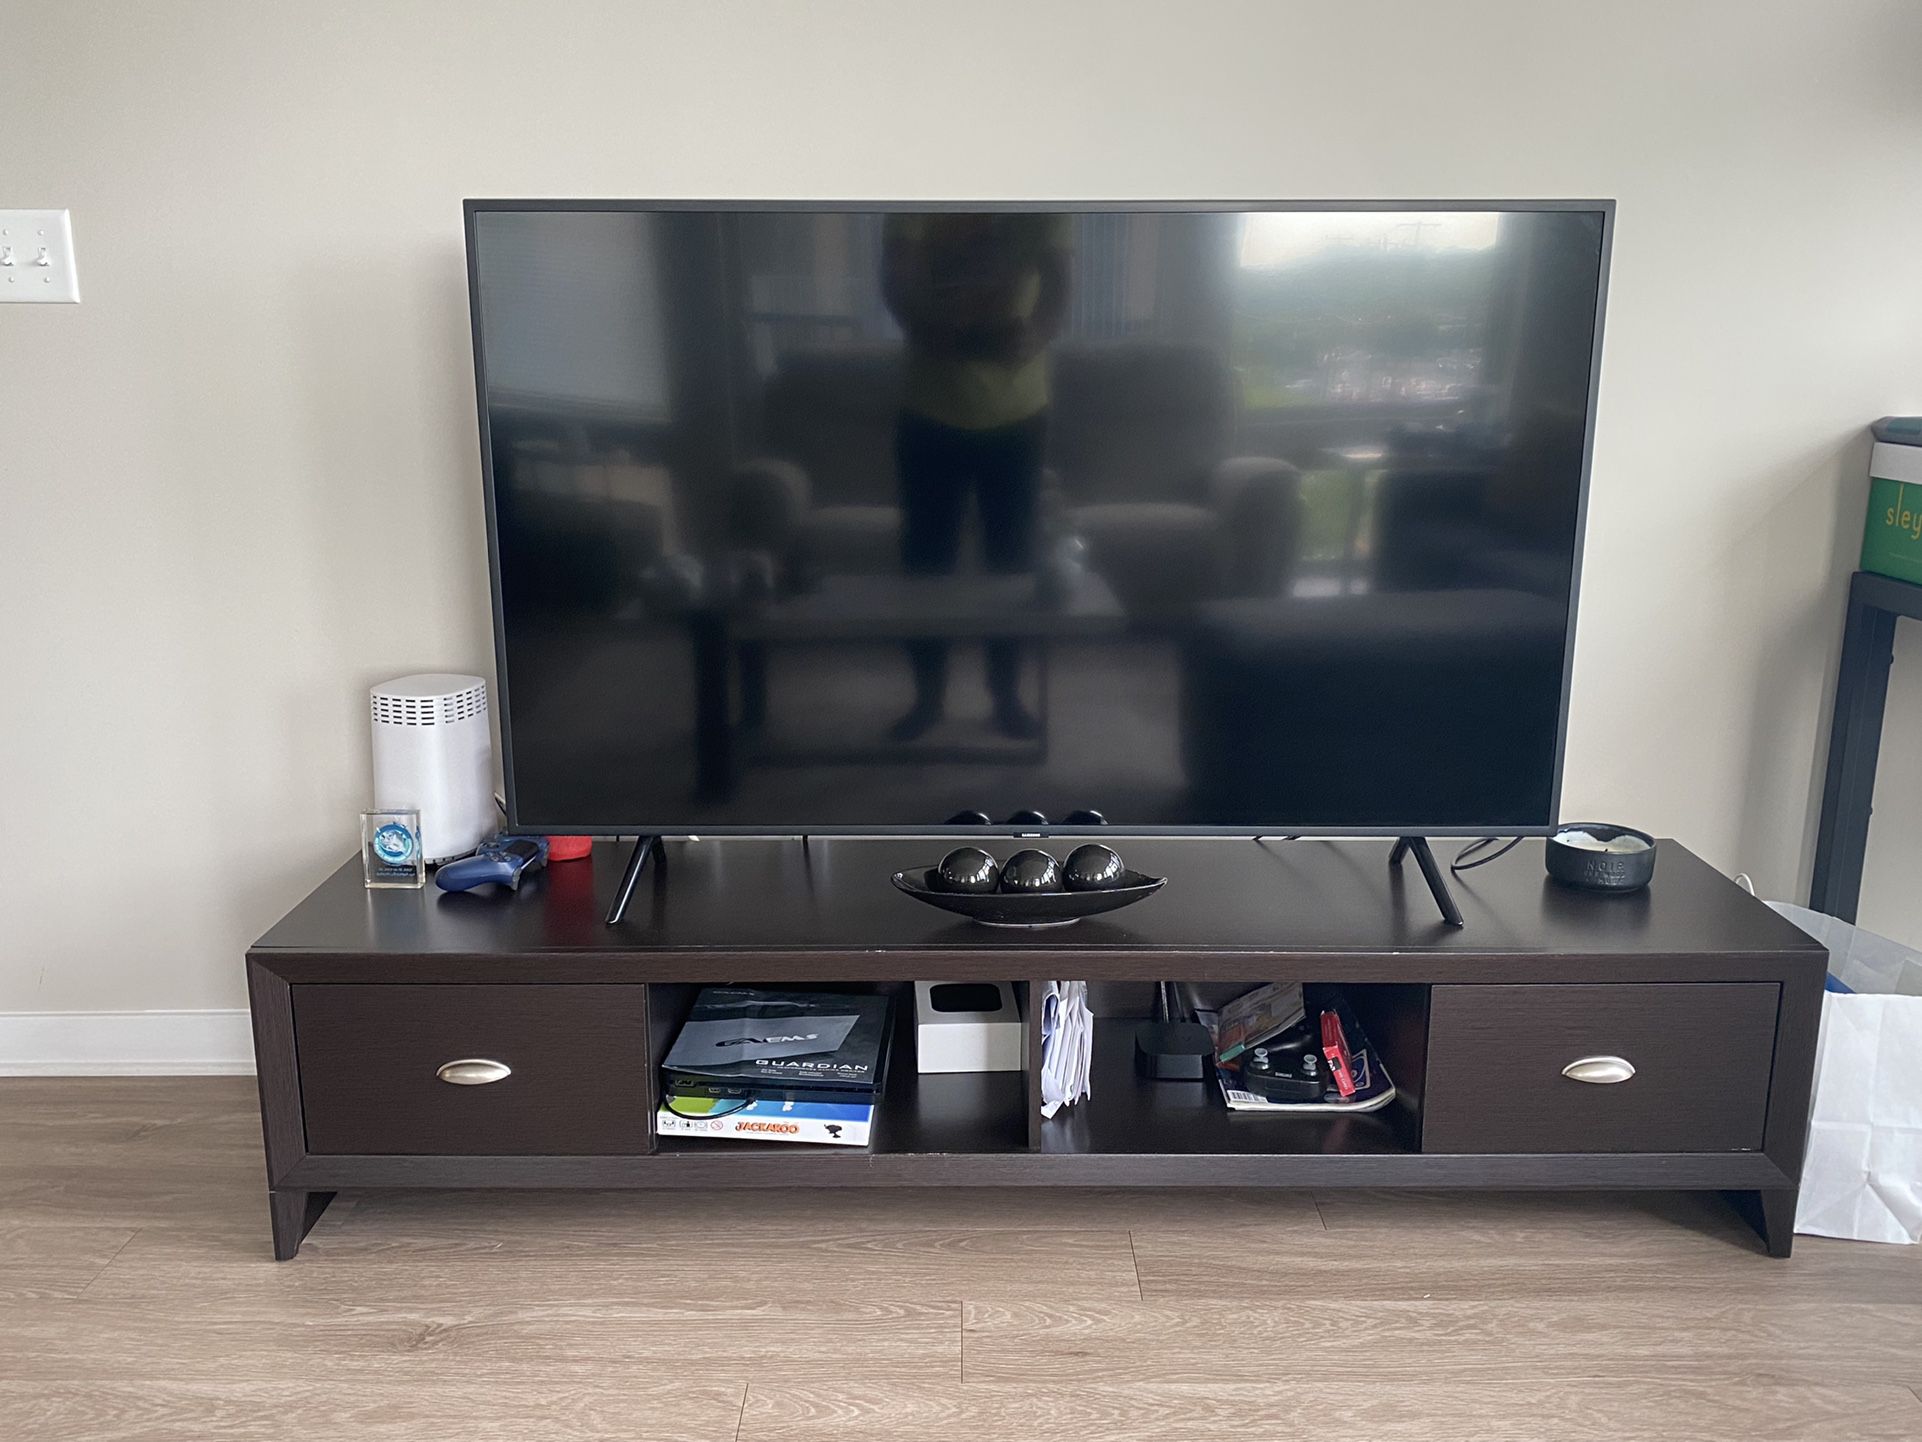 Samsung Smart TV 55 Inch With Wooden TV Console